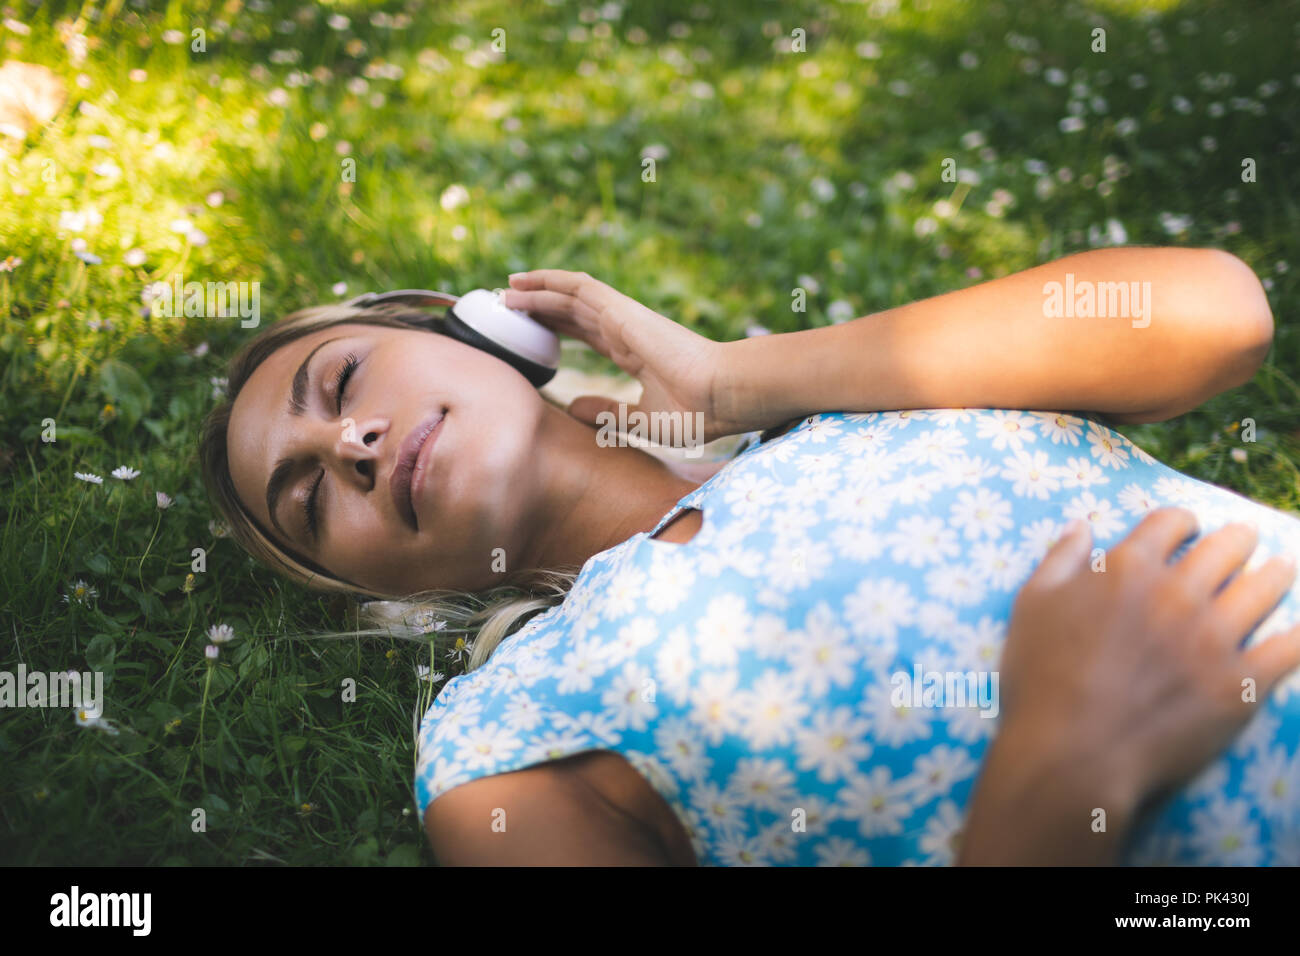 Woman listening music in garden Banque D'Images